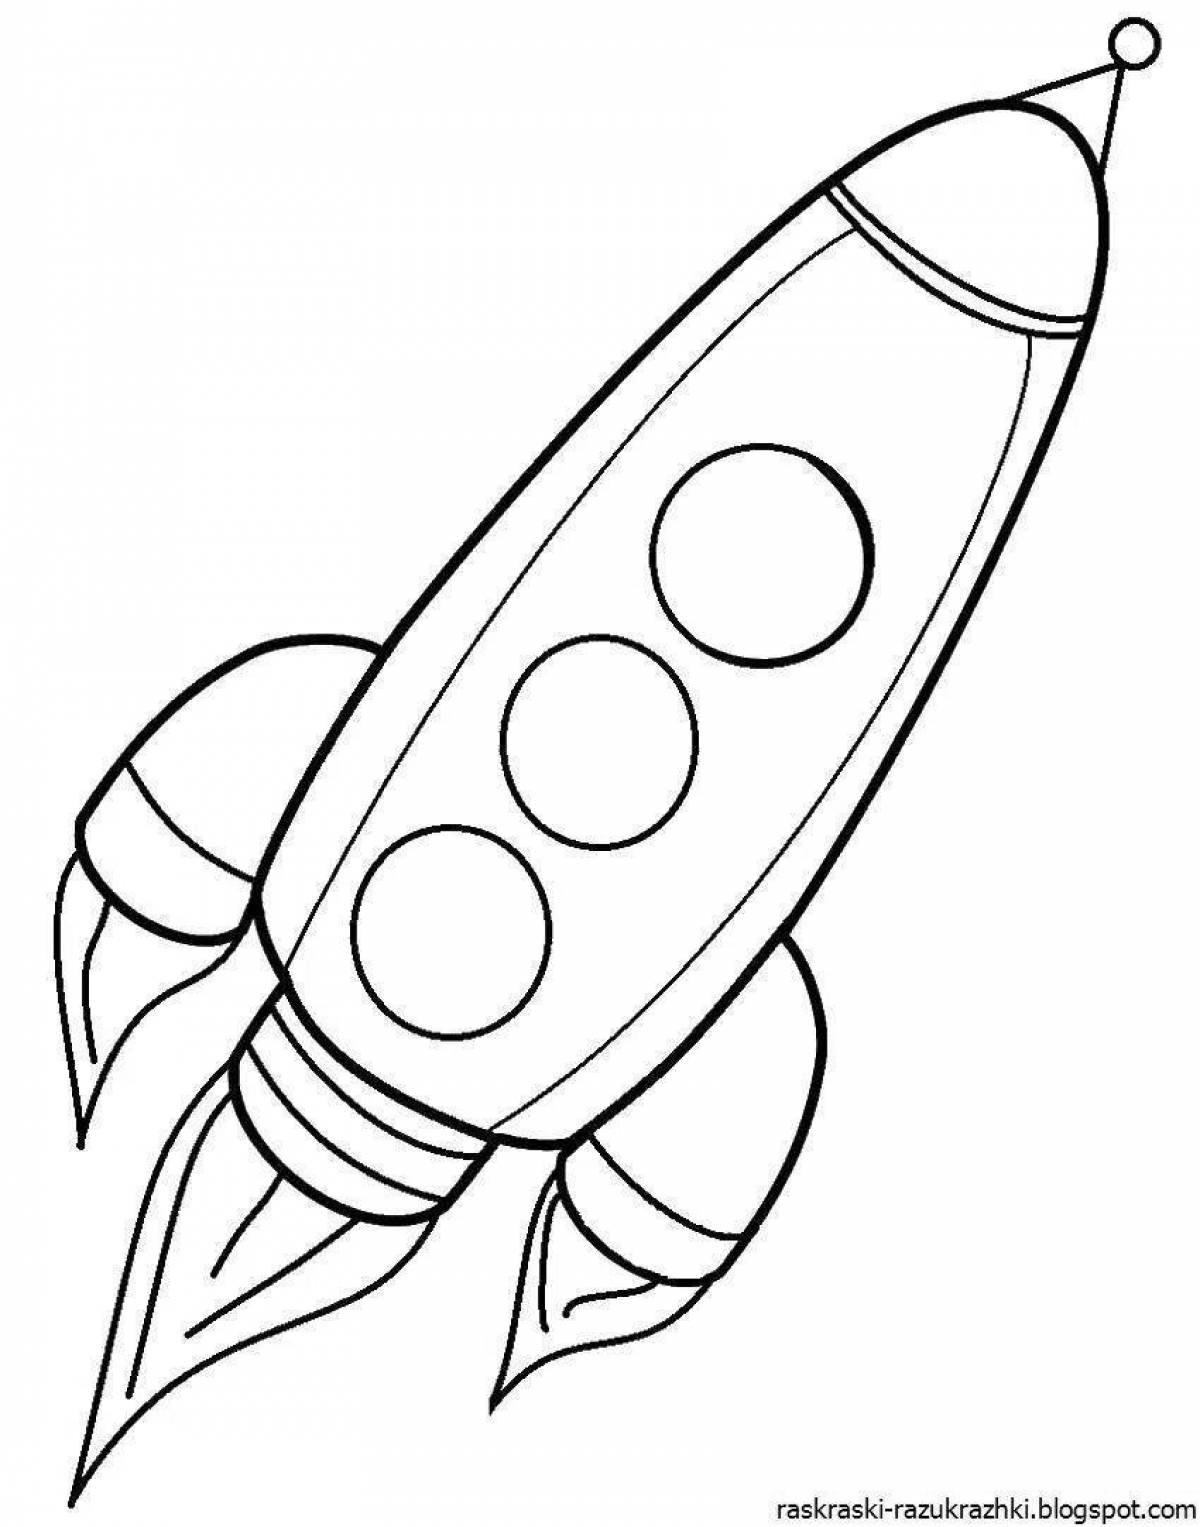 Amazing rocket coloring book for 5-6 year olds